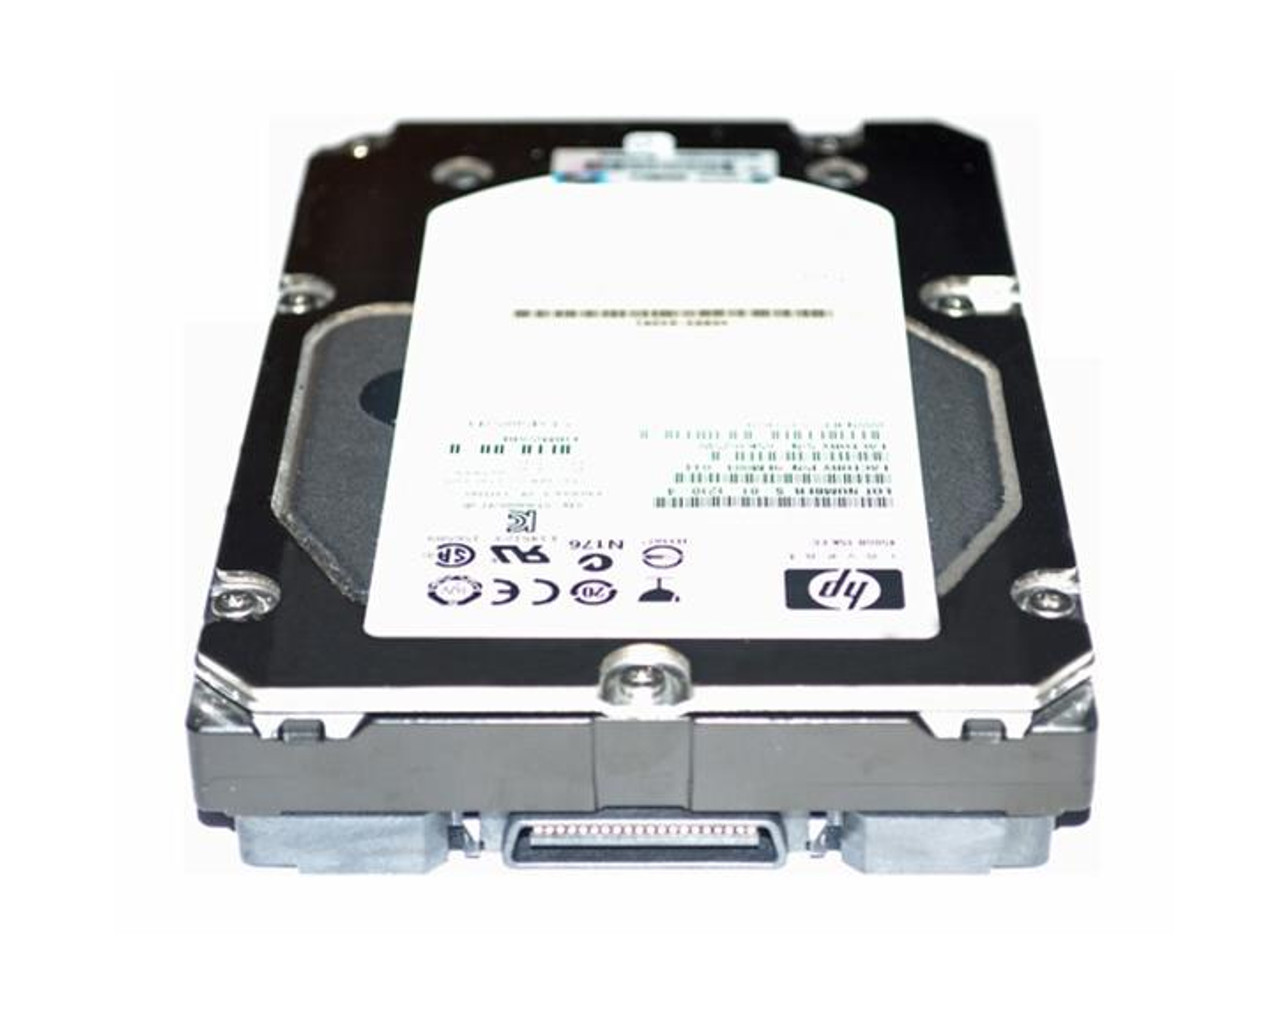 RP001233454 HP 400GB 10000RPM Fibre Channel 4Gbps Dual Port Hot Swap 3.5-inch Internal Hard Drive for StorageWorks EVA5000